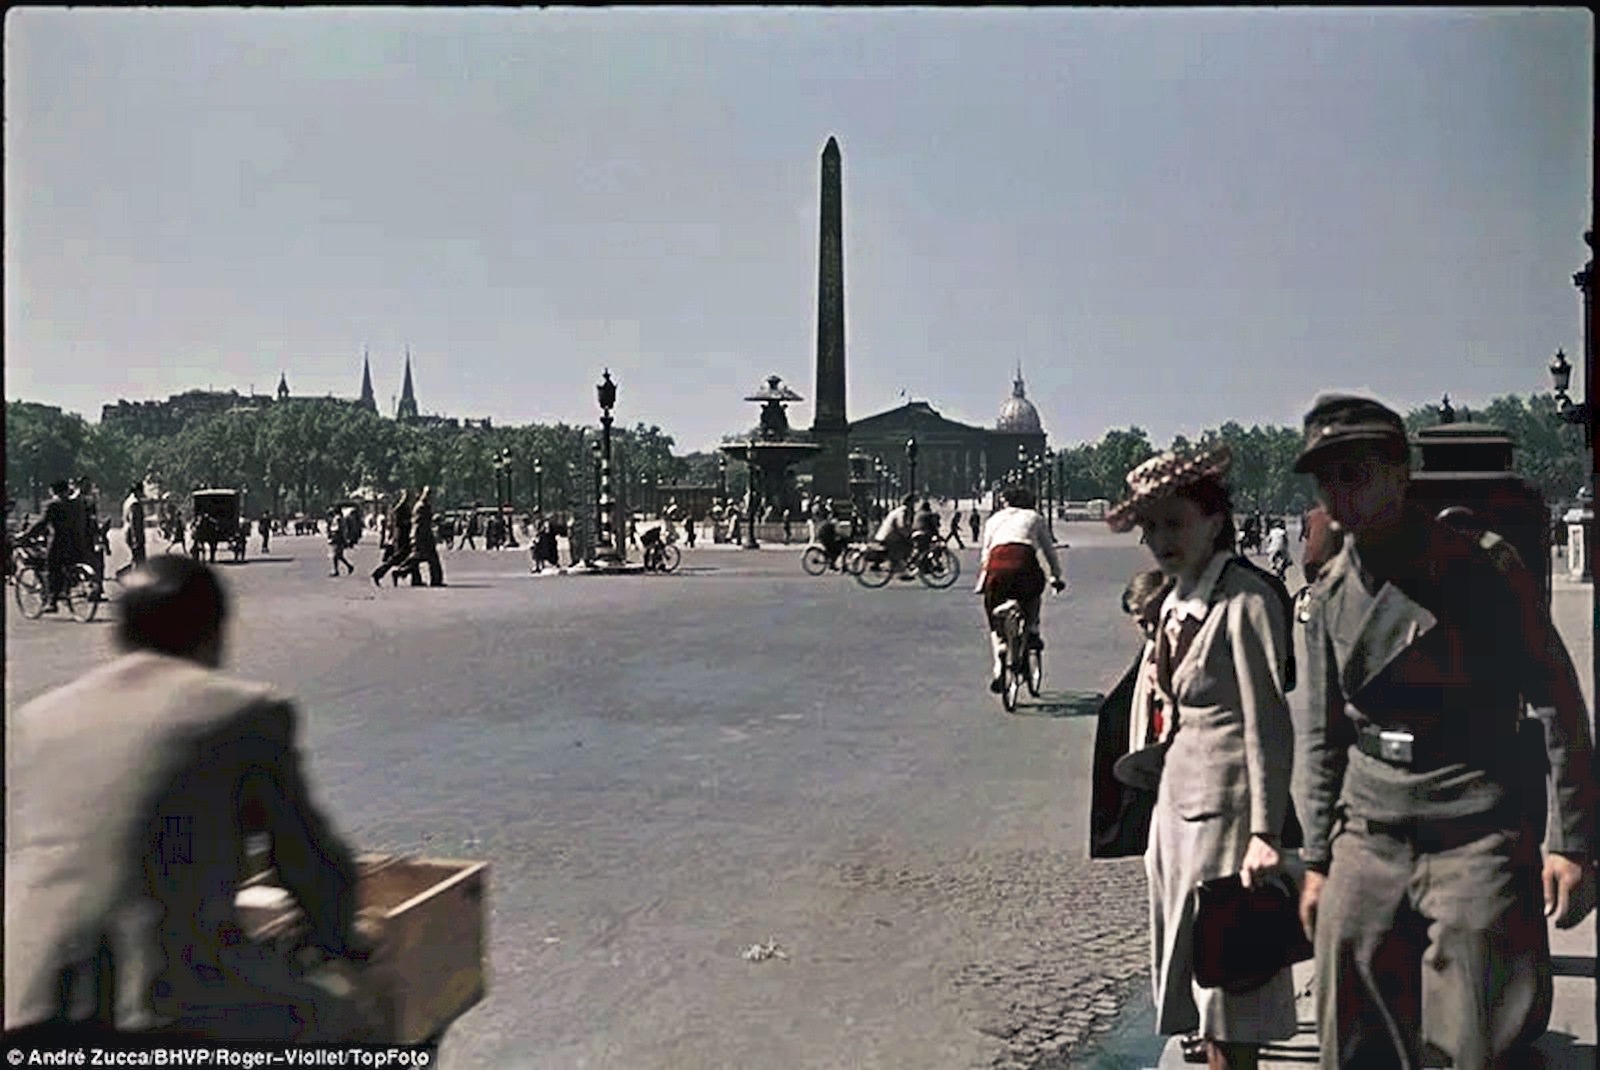 A soldier and civilians mill around near Cleopatra’s Needle in the Place de la Concorde, one of three obelisks taken from Egypt and re-erected in Paris, London, and New York during the 19th Century.